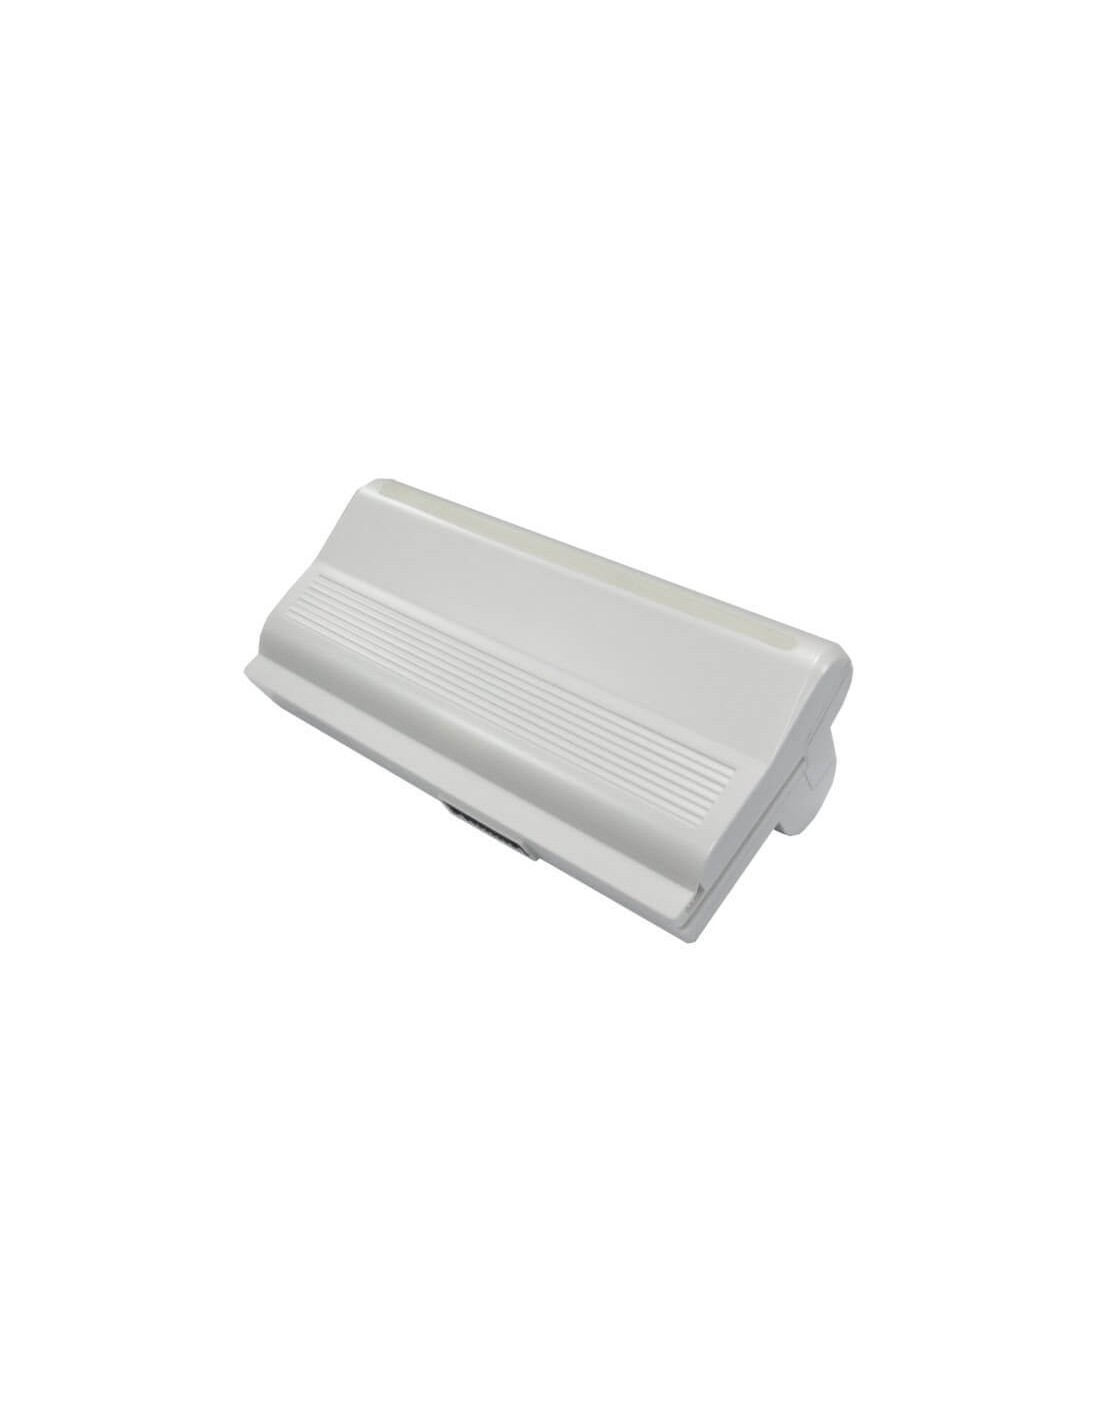 White Battery for Asus Eee Pc 901, Eee Pc 904, Eee Pc 904hd 7.4V, 8800mAh - 65.12Wh